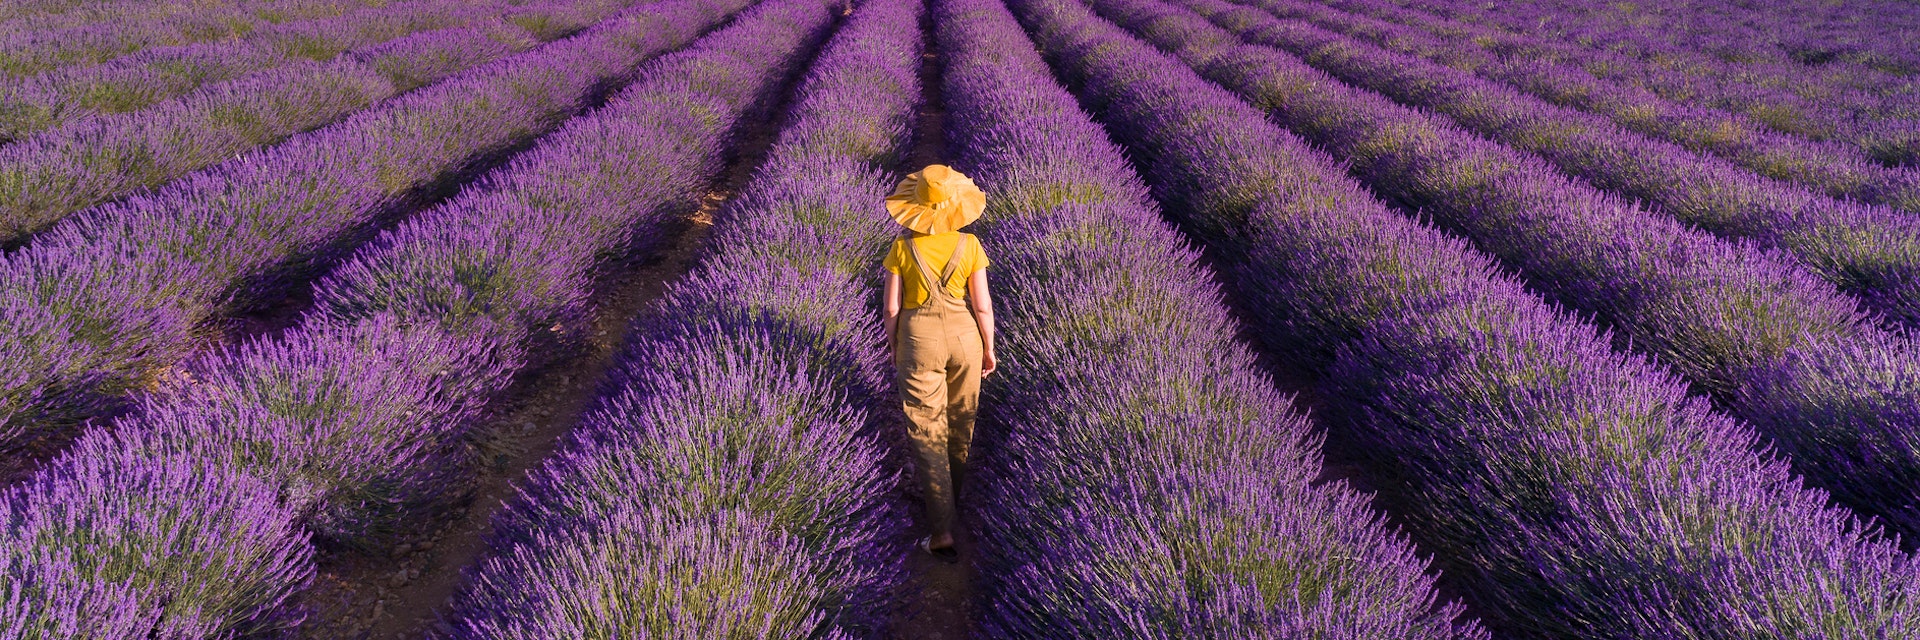 Woman enjoying the lavender fields in Provence. France. Aerial view.